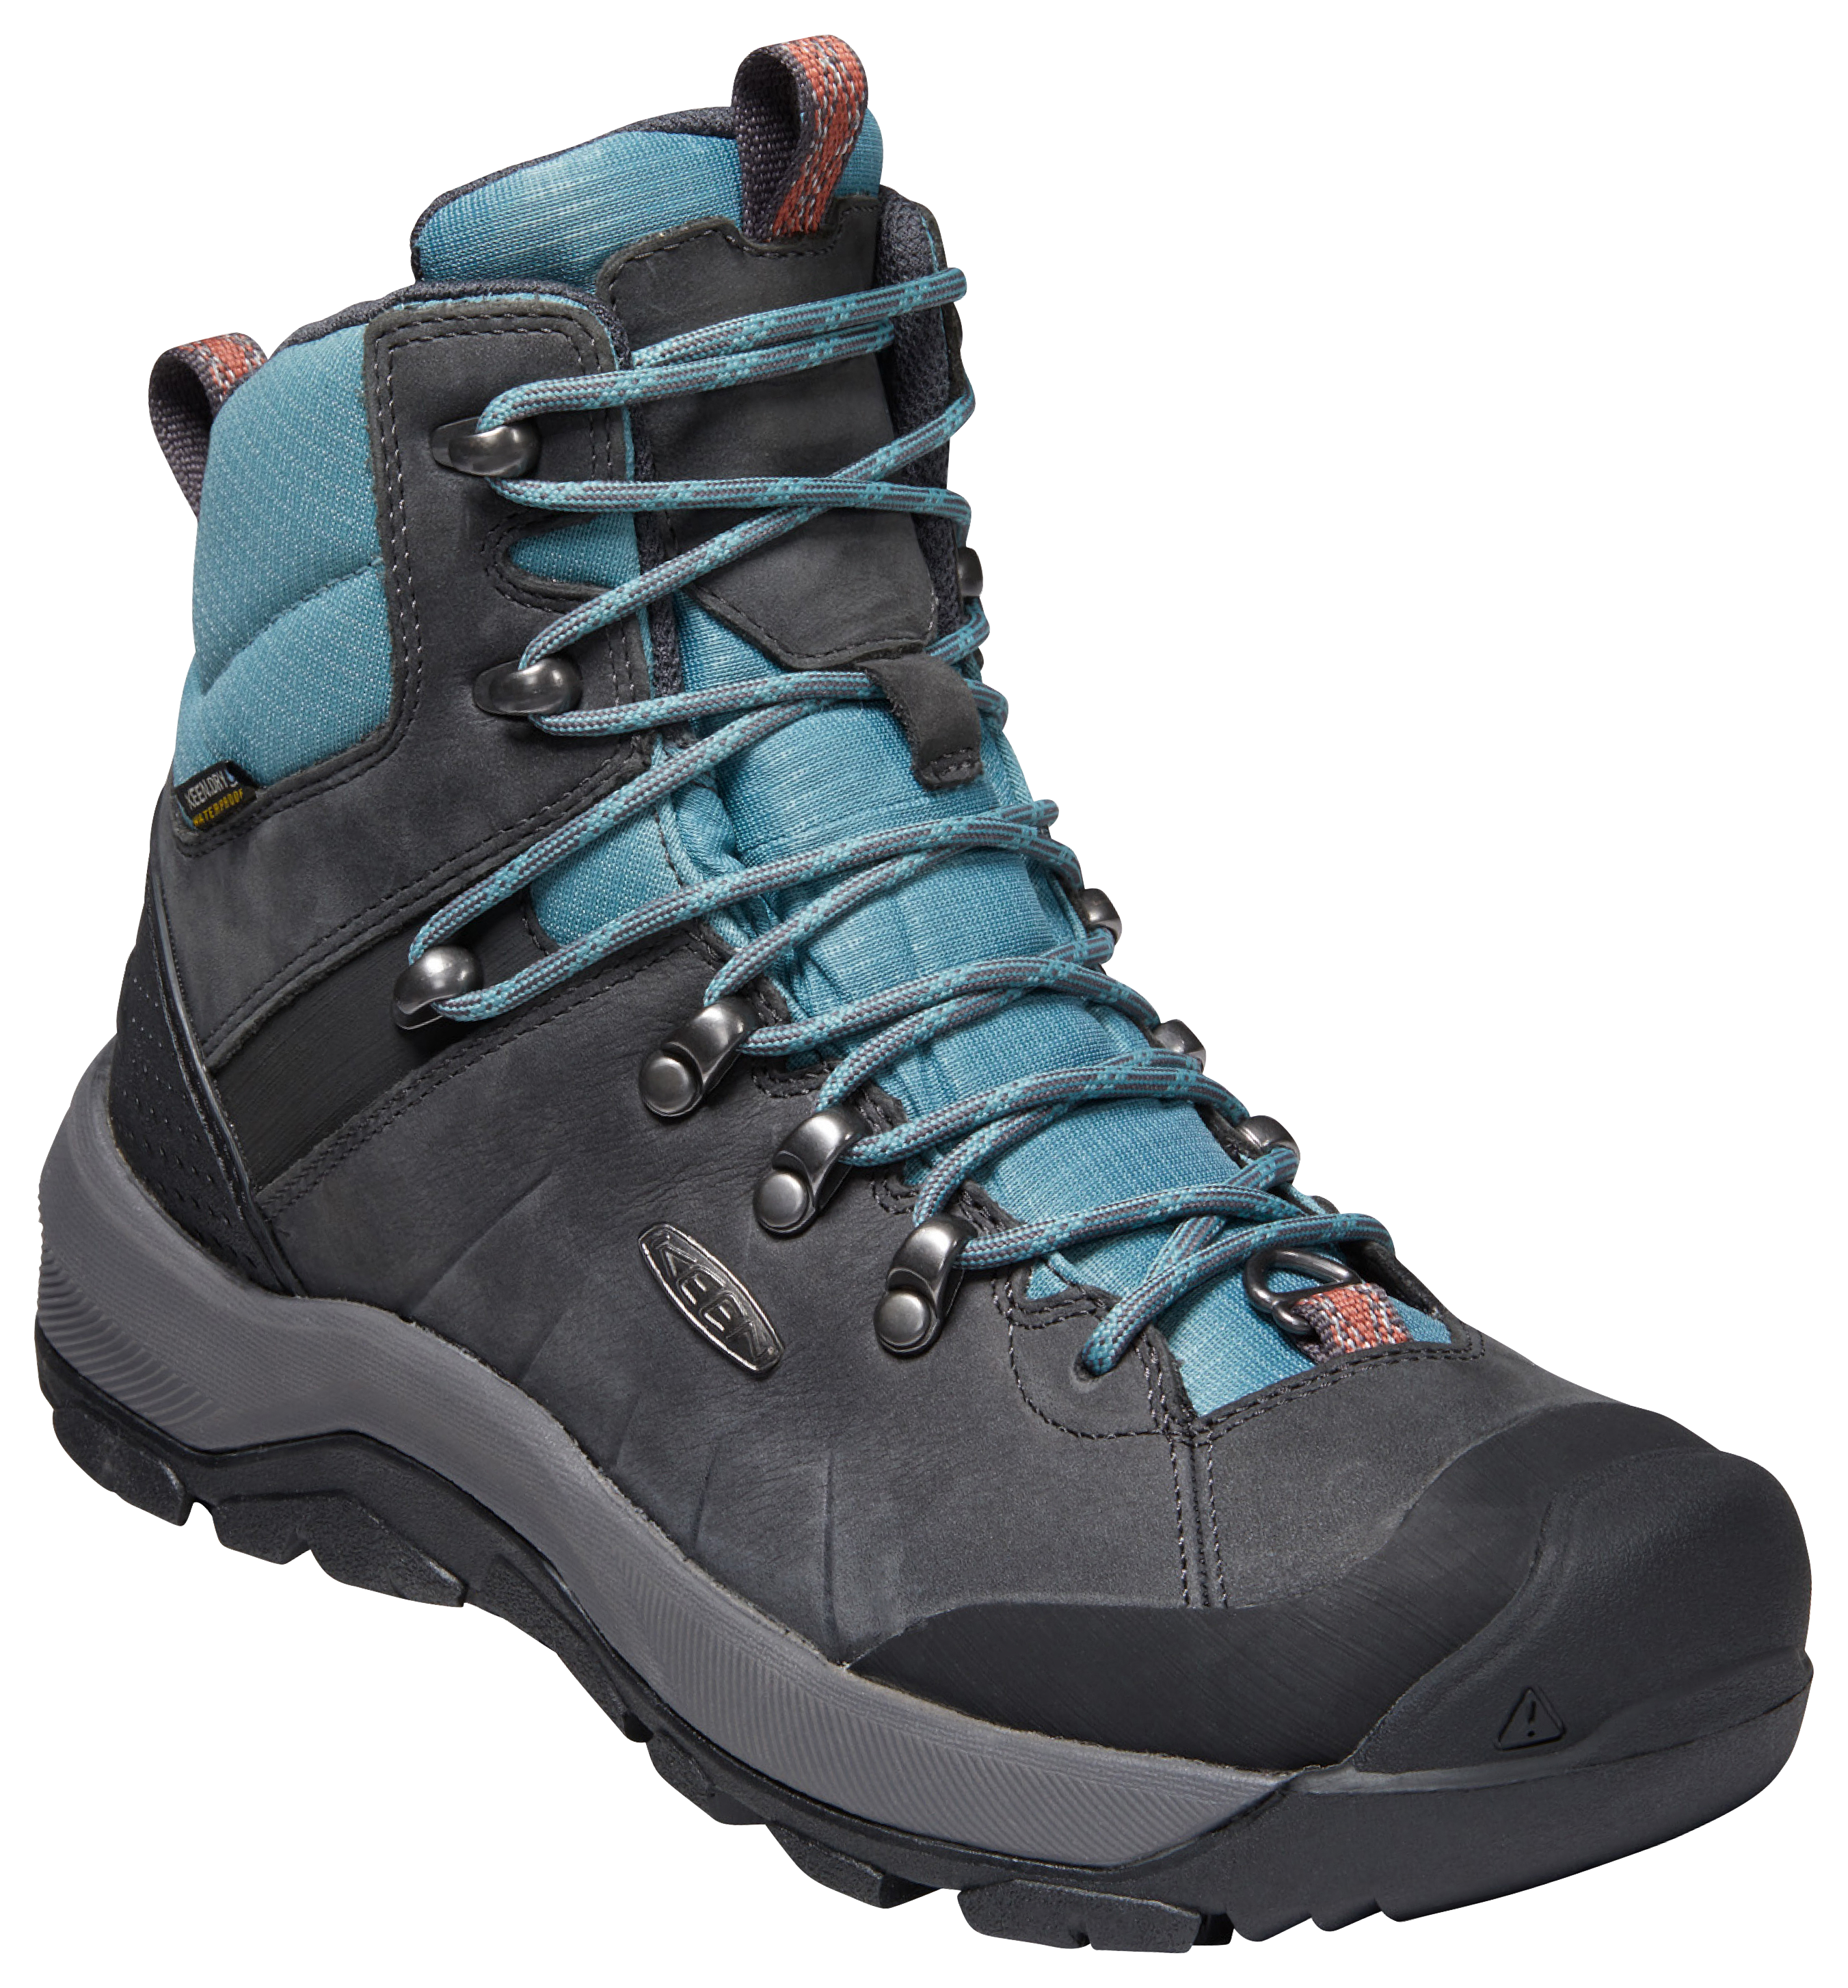 KEEN Revel IV Polar Insulated Waterproof Hiking Boots for Ladies - Magnet/North Atlantic - 8M